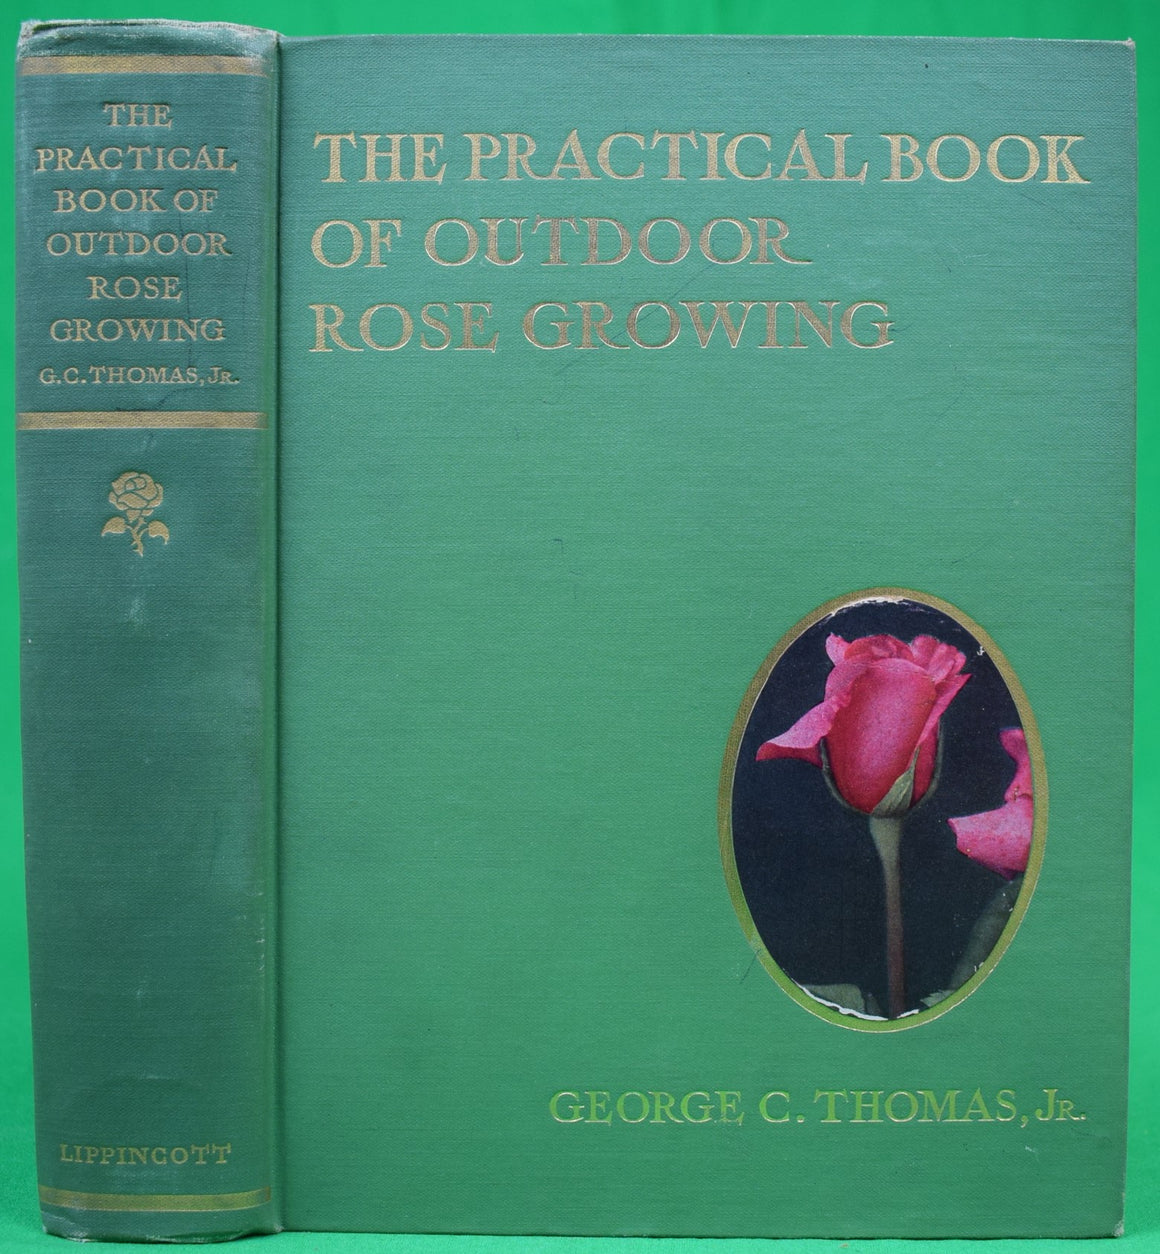 "The Practical Book Of Outdoor Rose Growing" 1915 THOMAS, George C. Jr